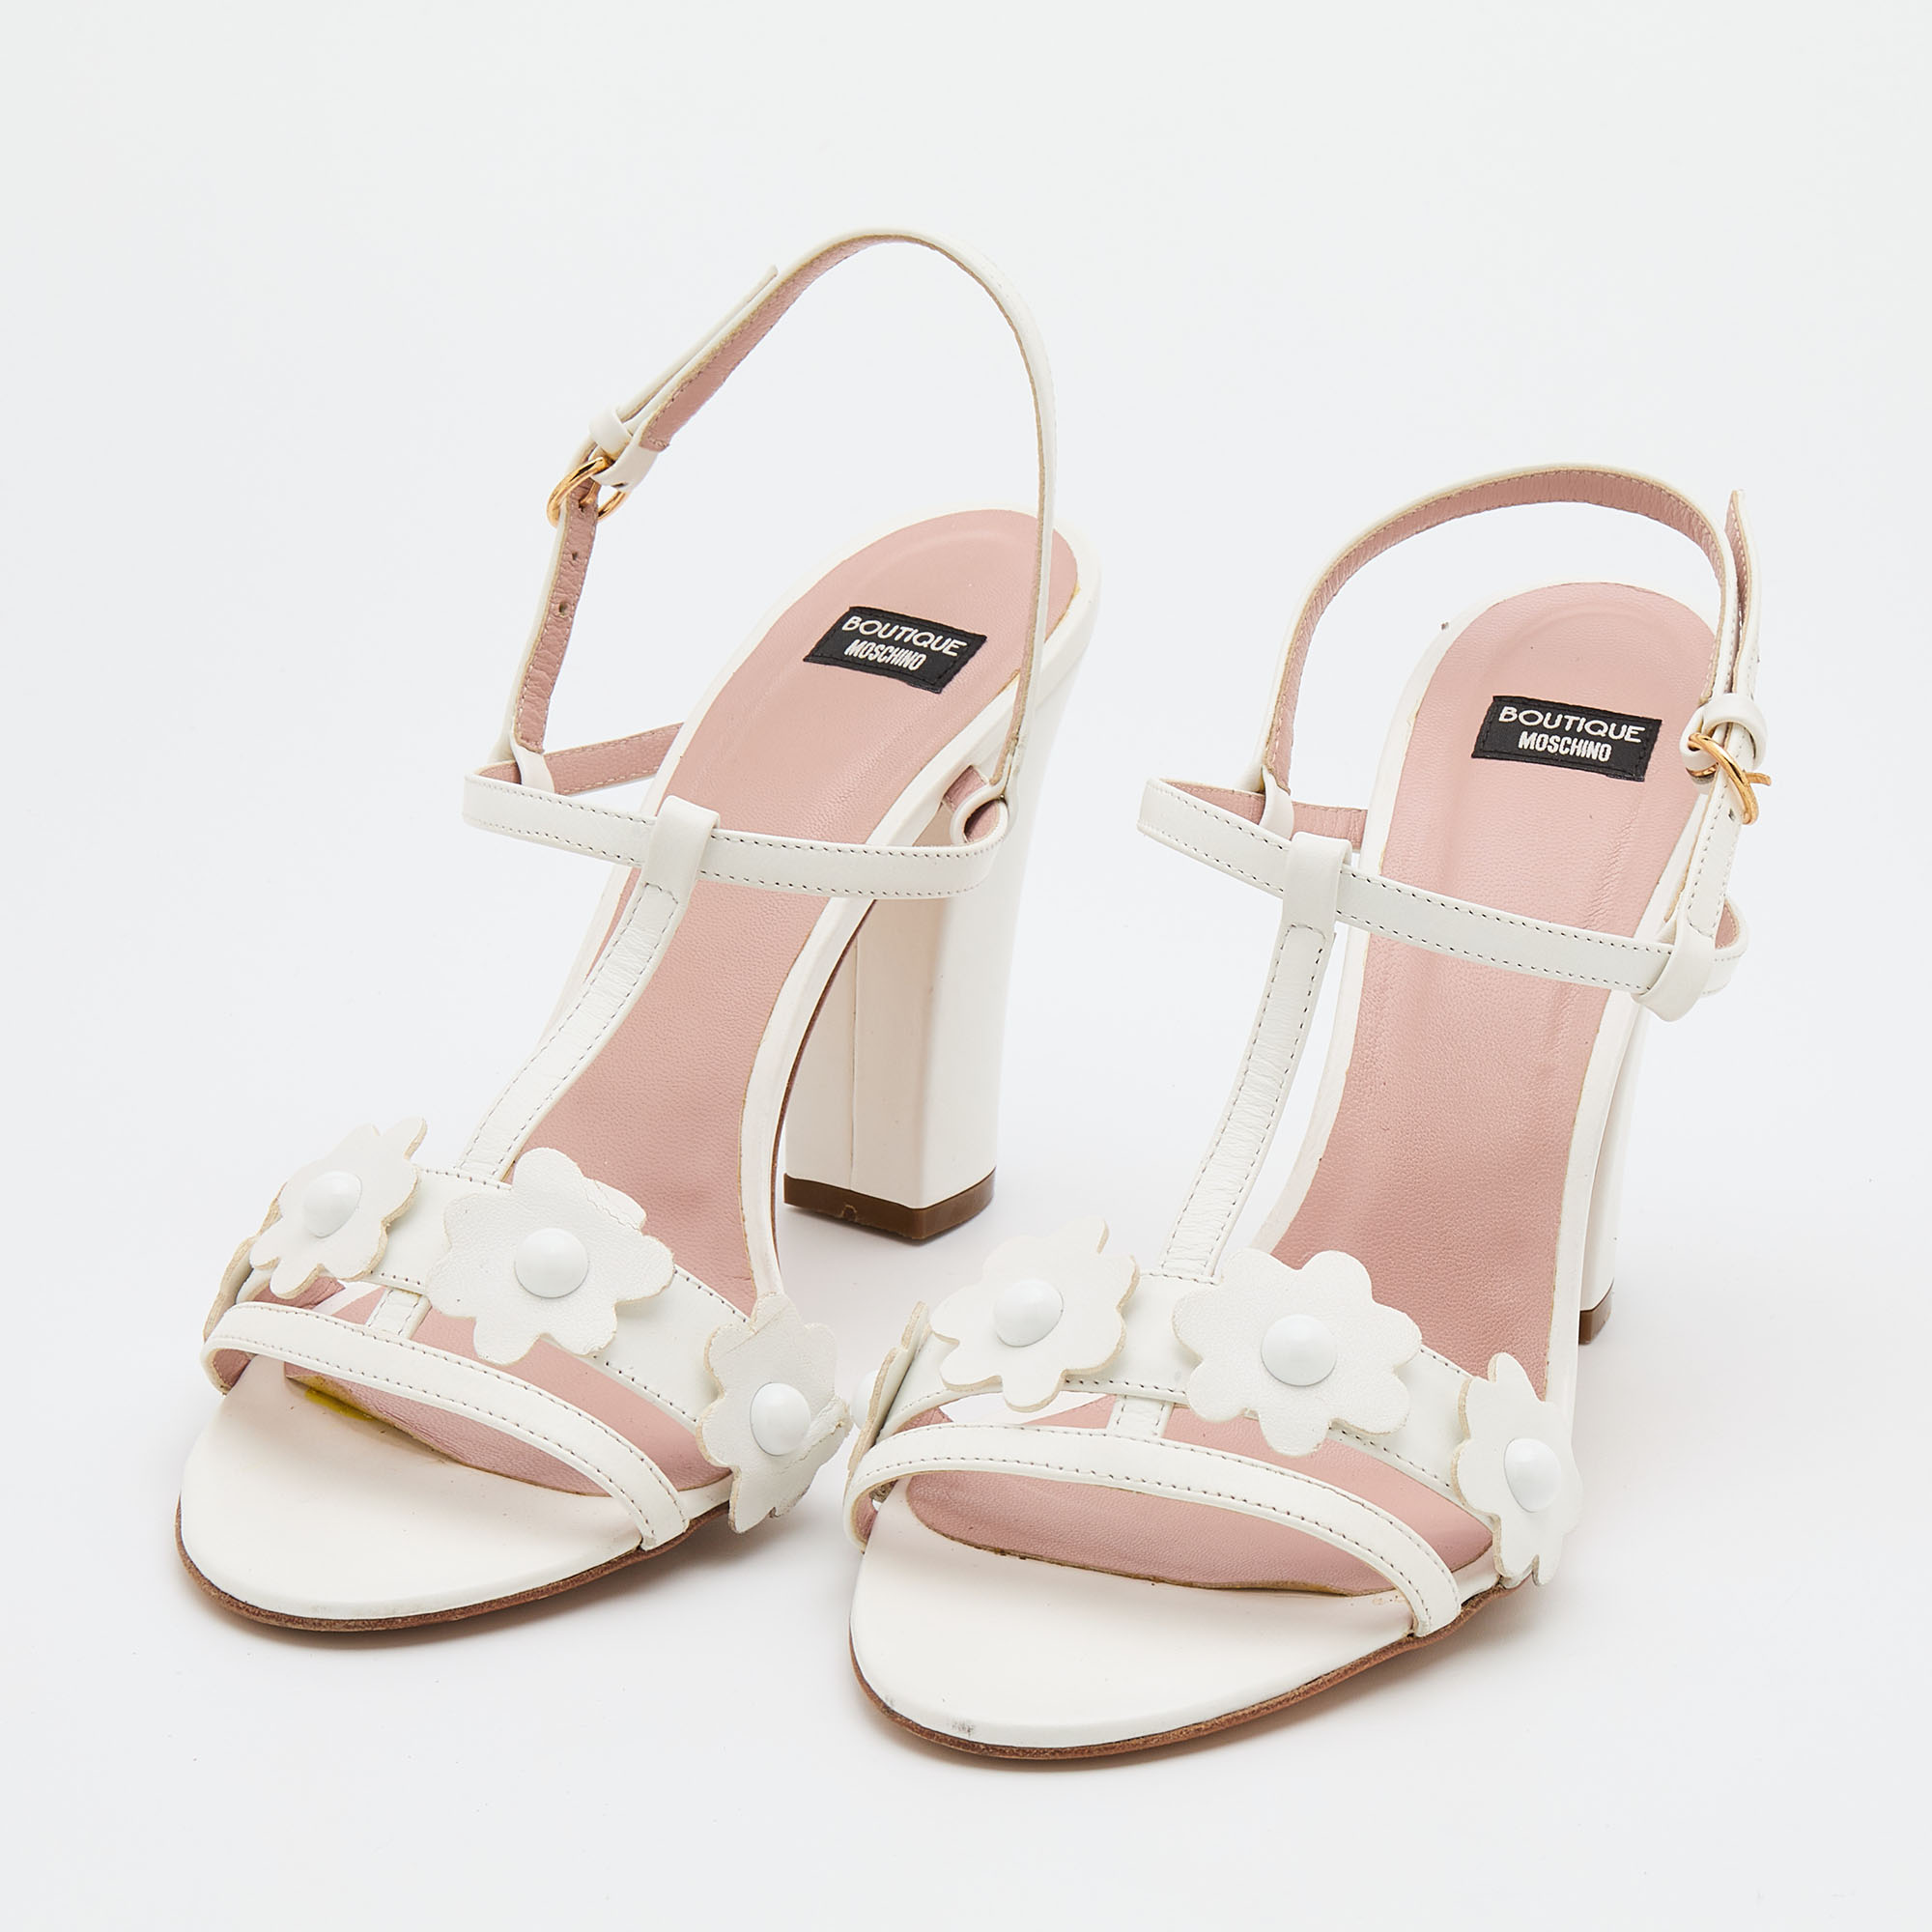 

Boutique Moschino White Leather Flower Applique Slingback Sandals Size